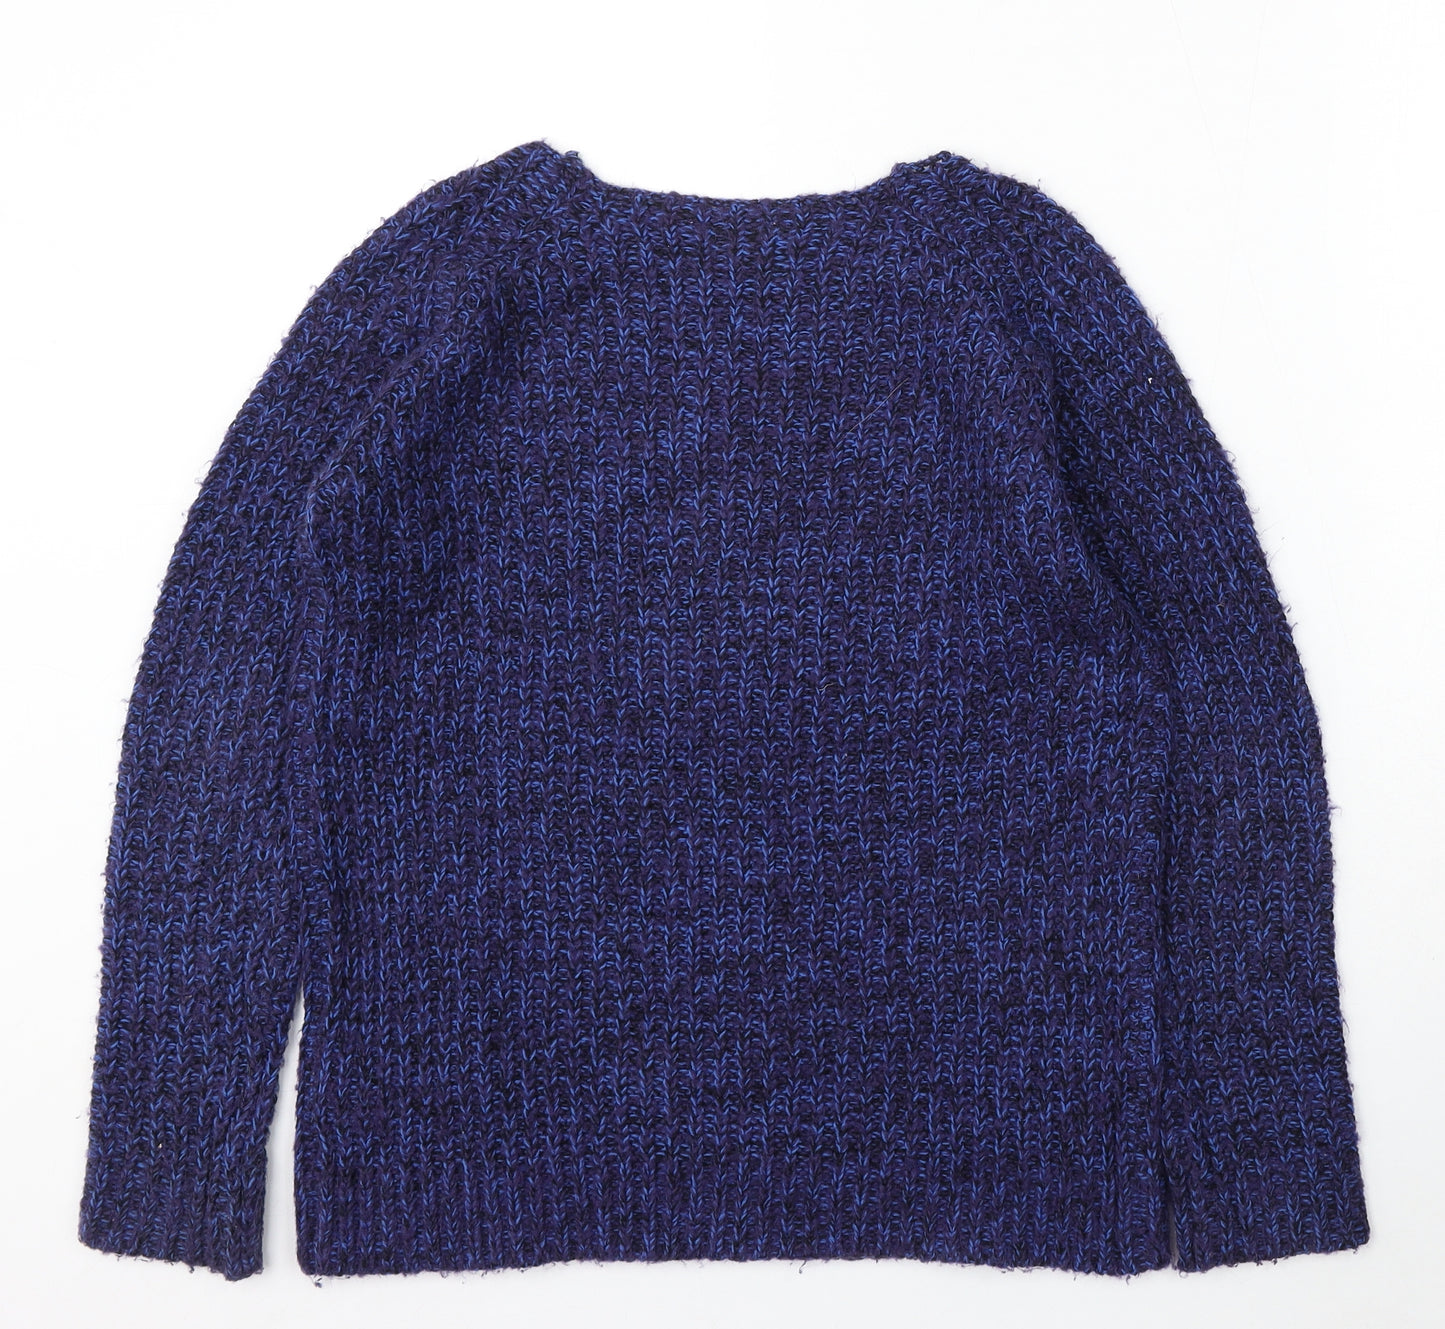 Generation Girls Blue Round Neck Acrylic Pullover Jumper Size 12-13 Years